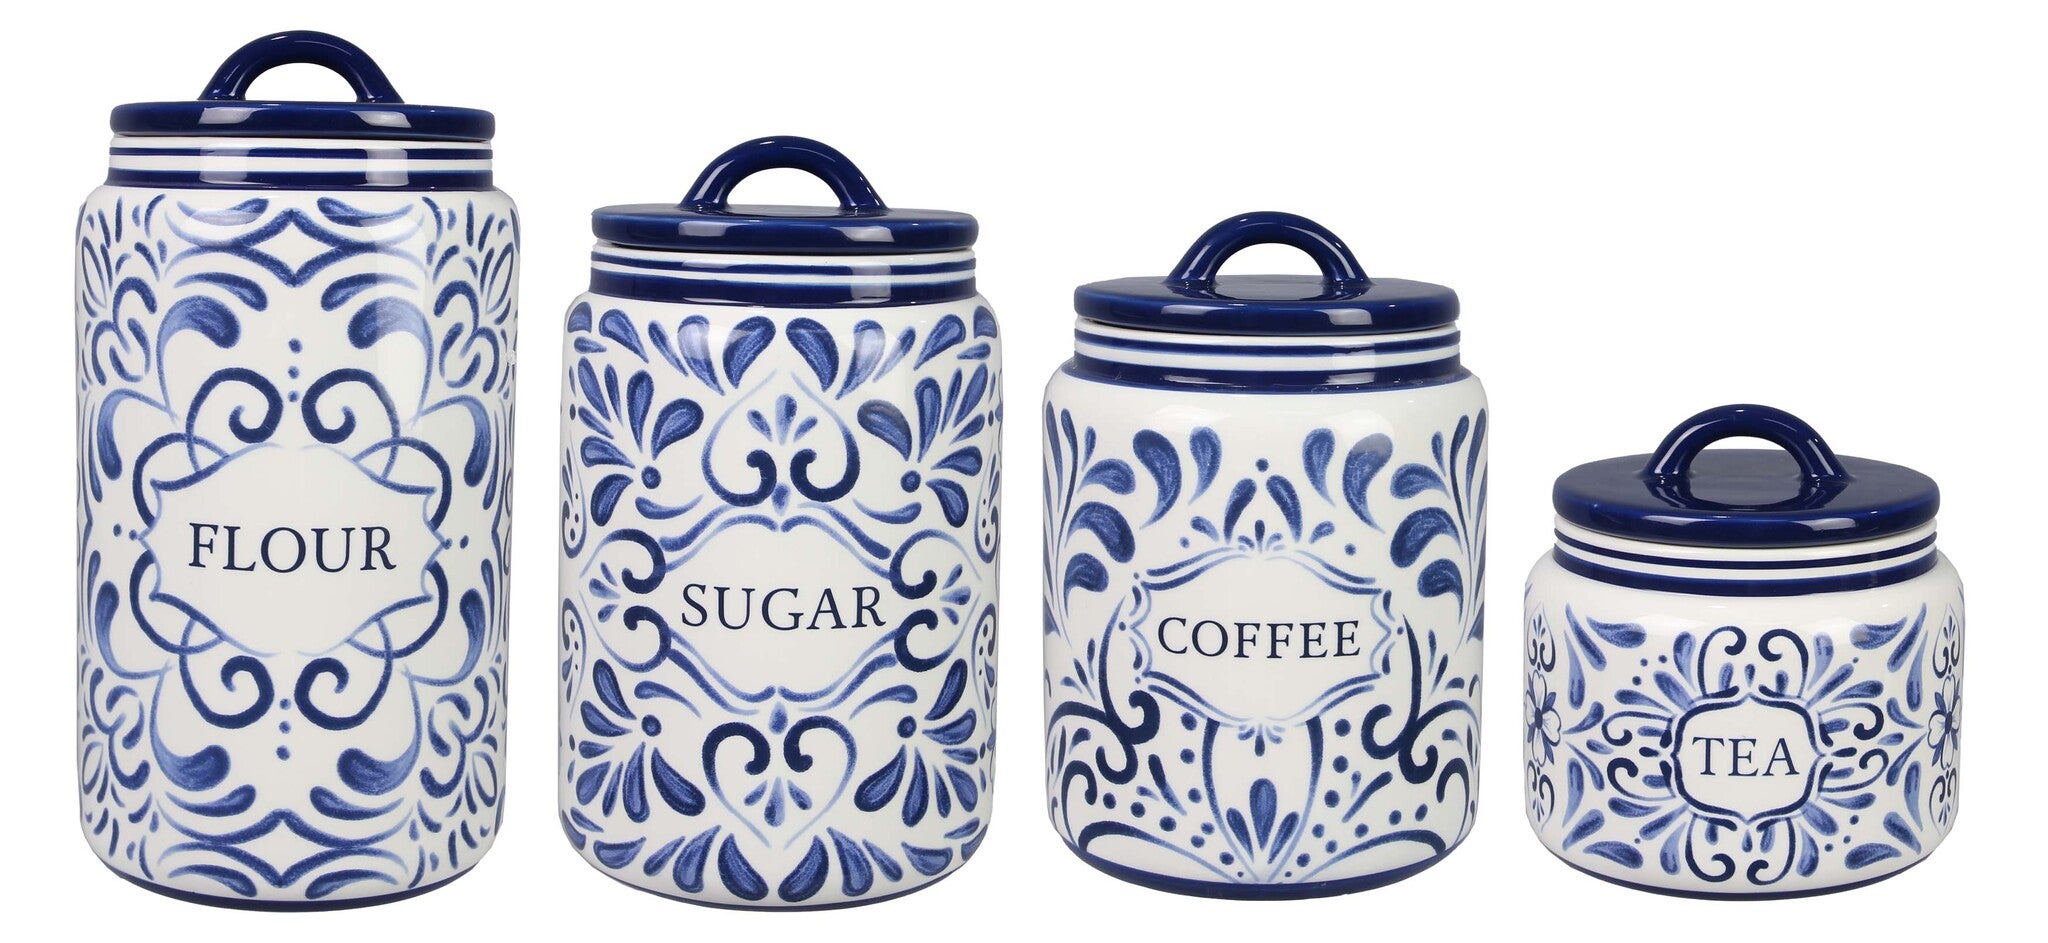 Young's Inc Ceramic Blue And White Talavera Canister 4pcs Set With